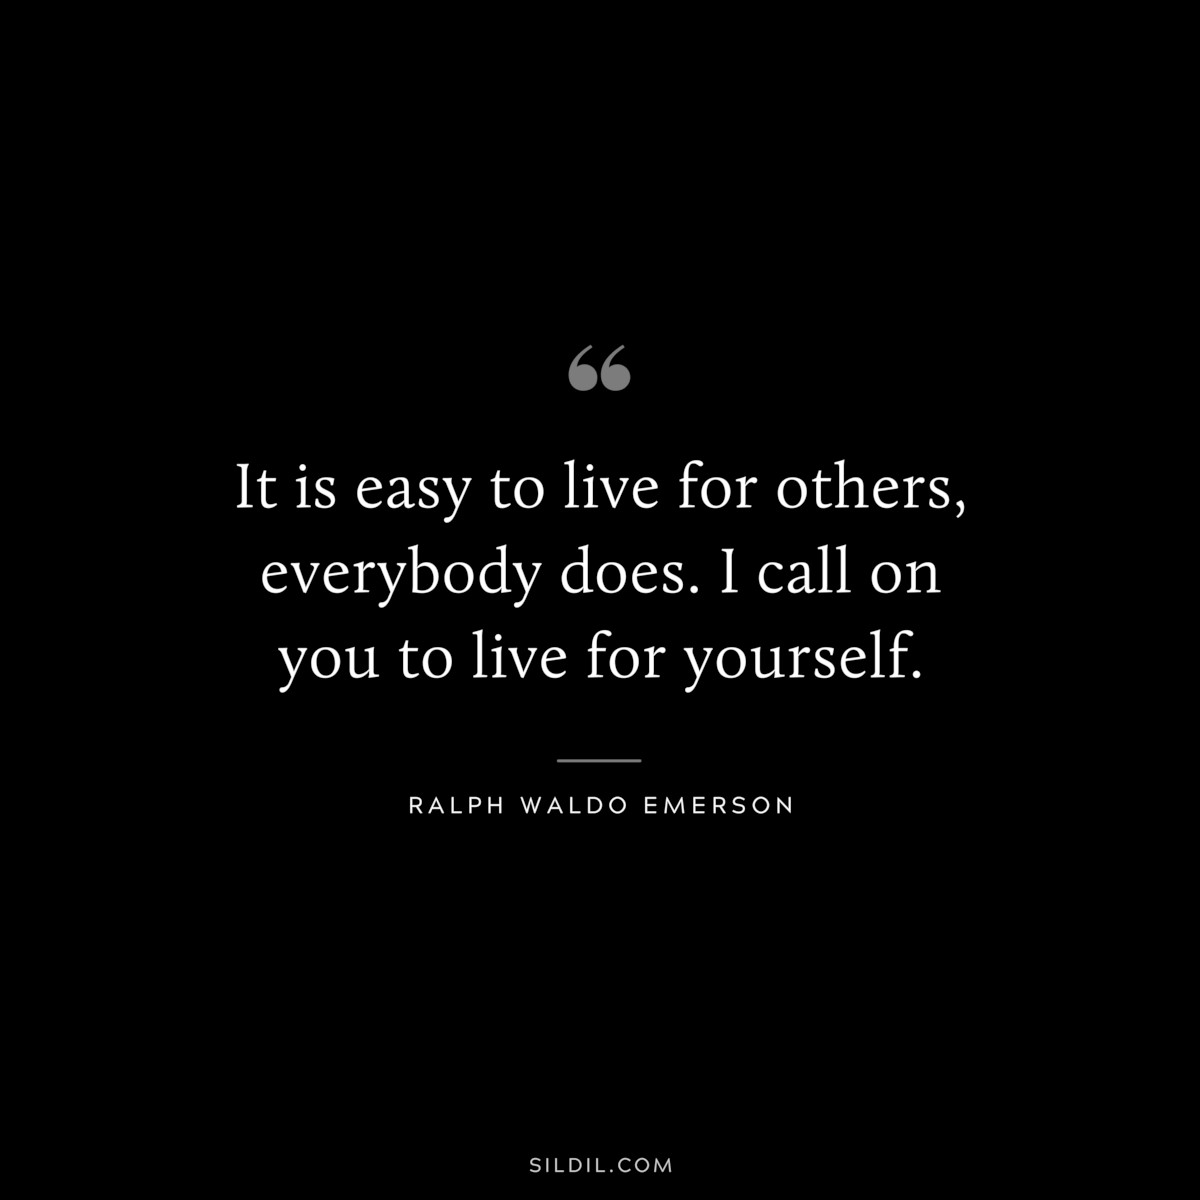 It is easy to live for others, everybody does. I call on you to live for yourself. — Ralph Waldo Emerson